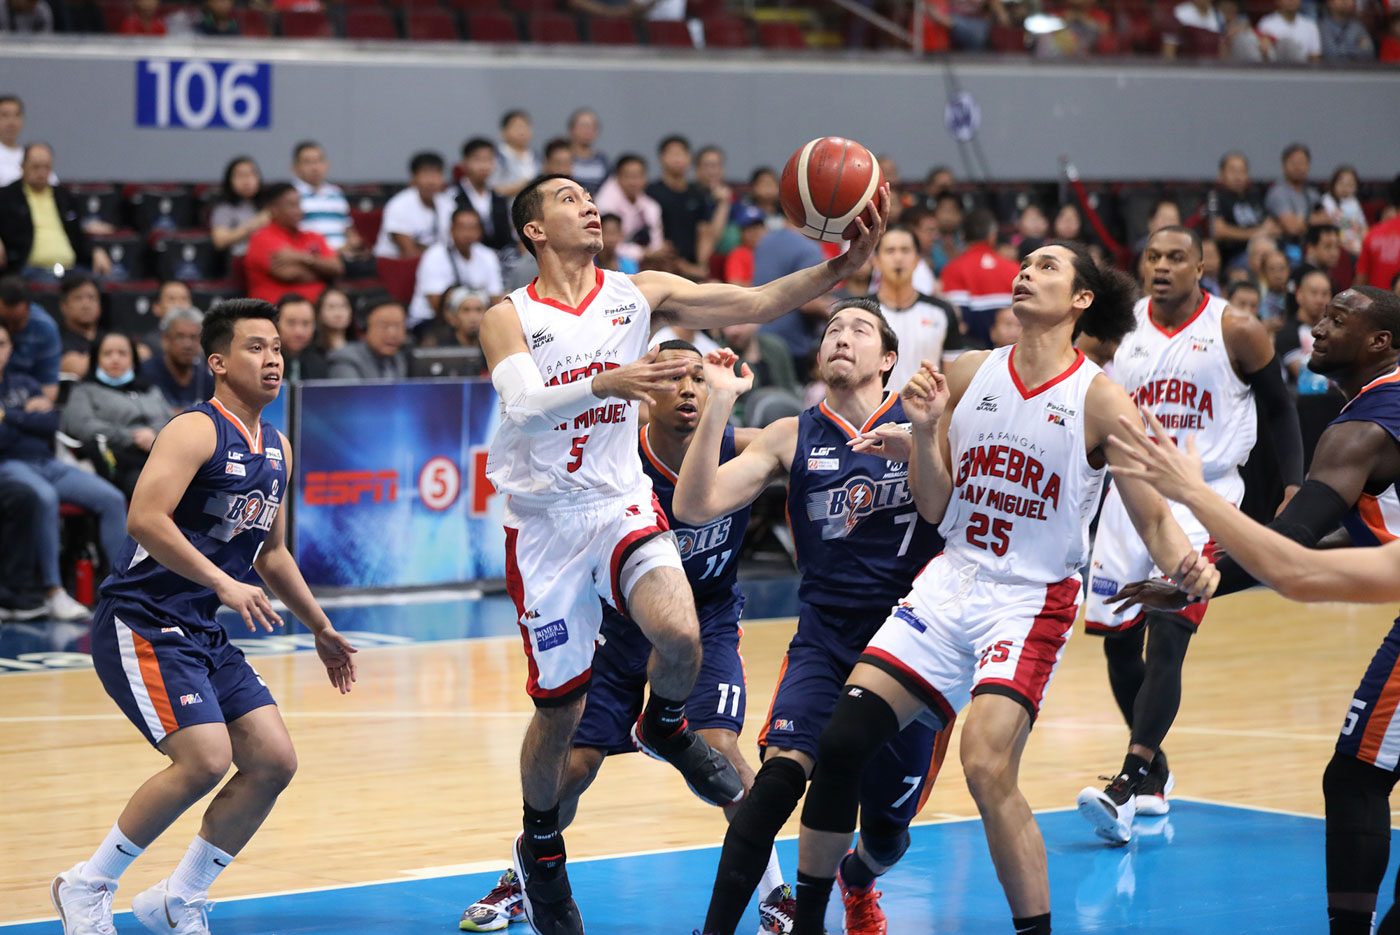 PBA could cancel season if mass gatherings remain banned for months